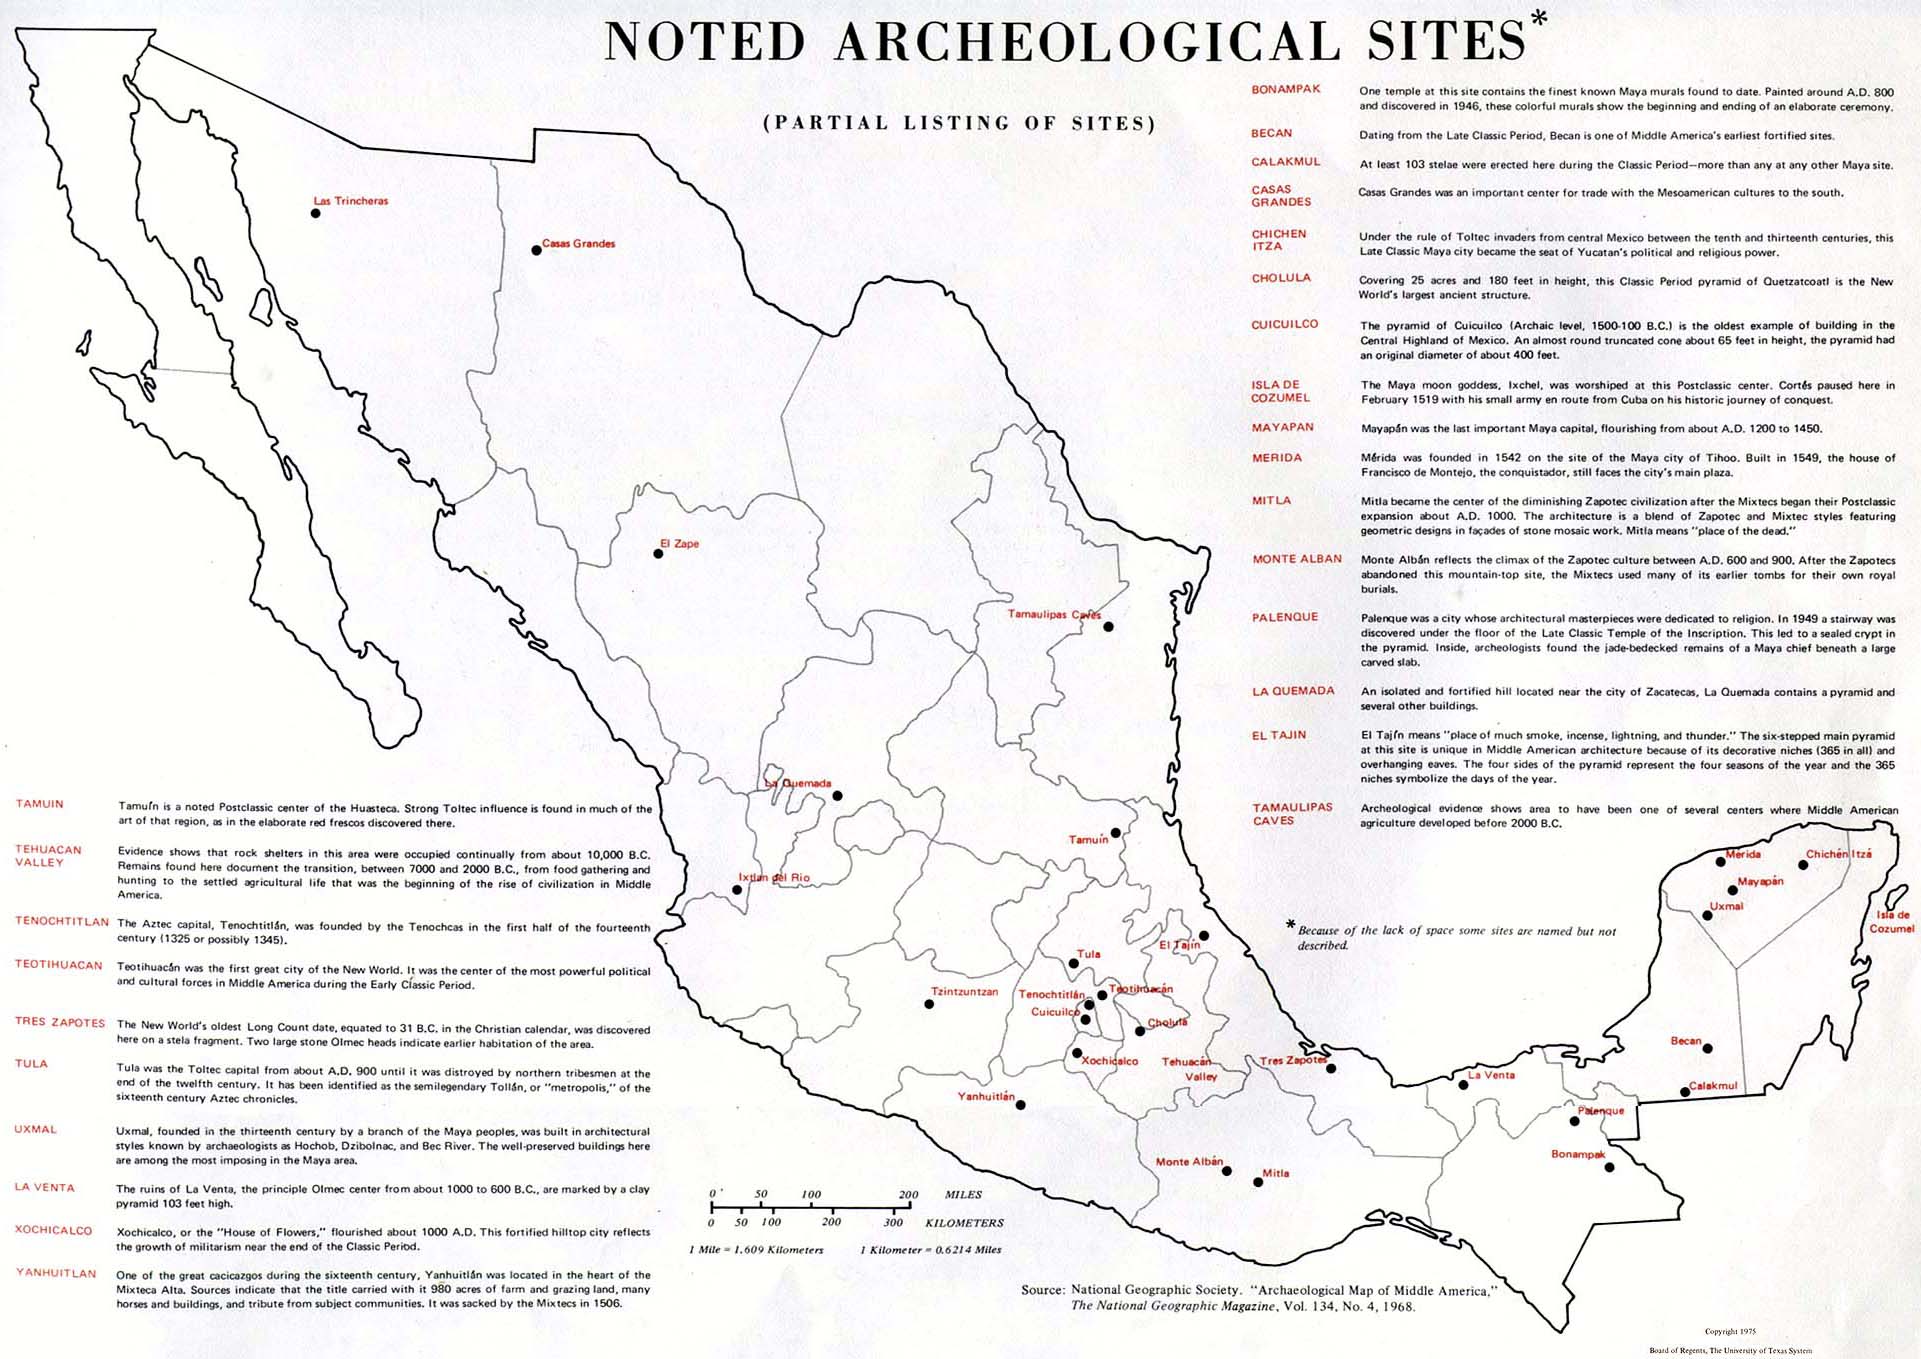 Mexico - Archaeological Sites 1968